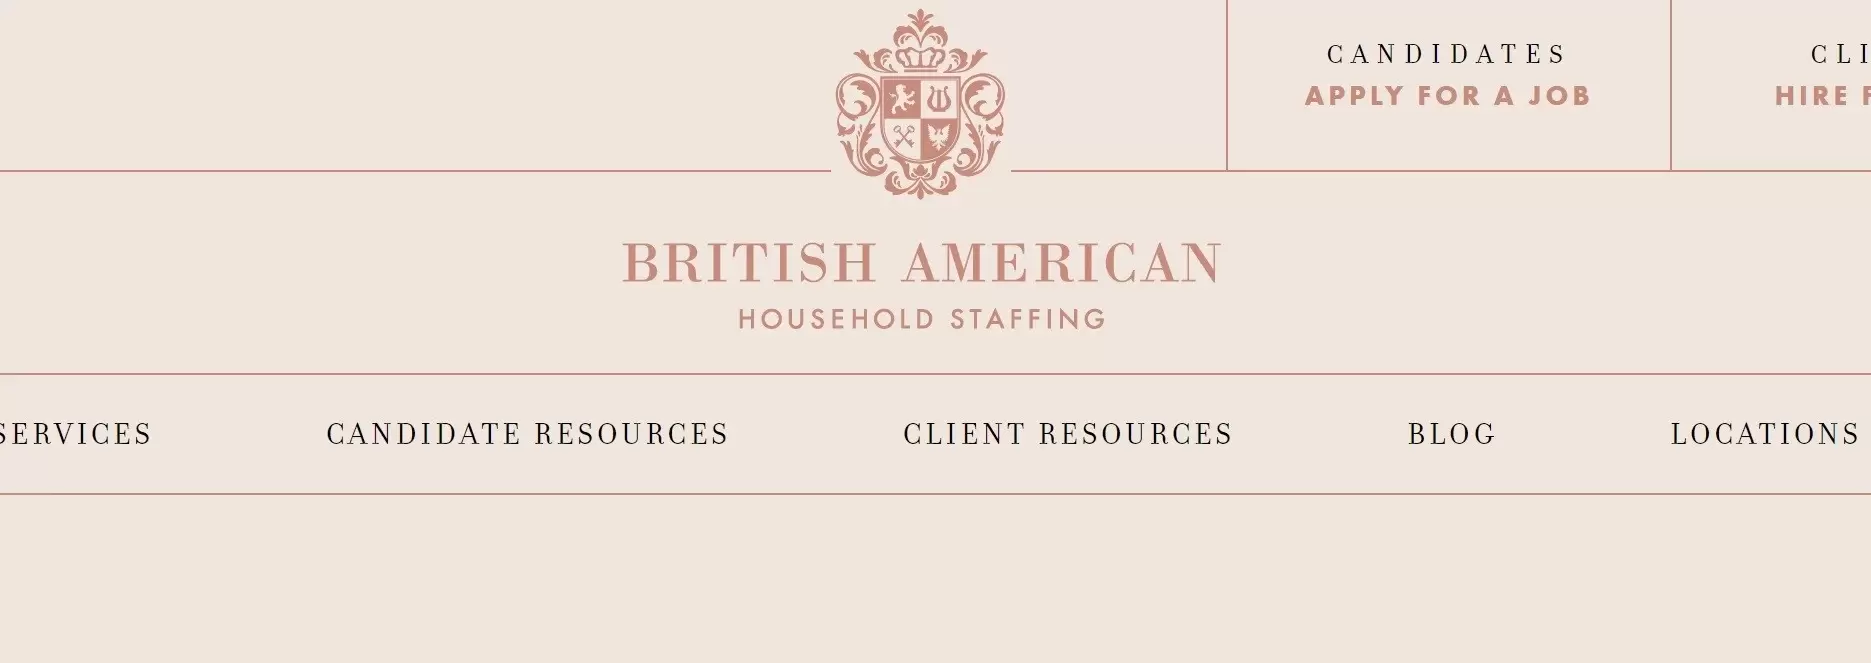 British-American Household Staffing: Company Profile & Reviews